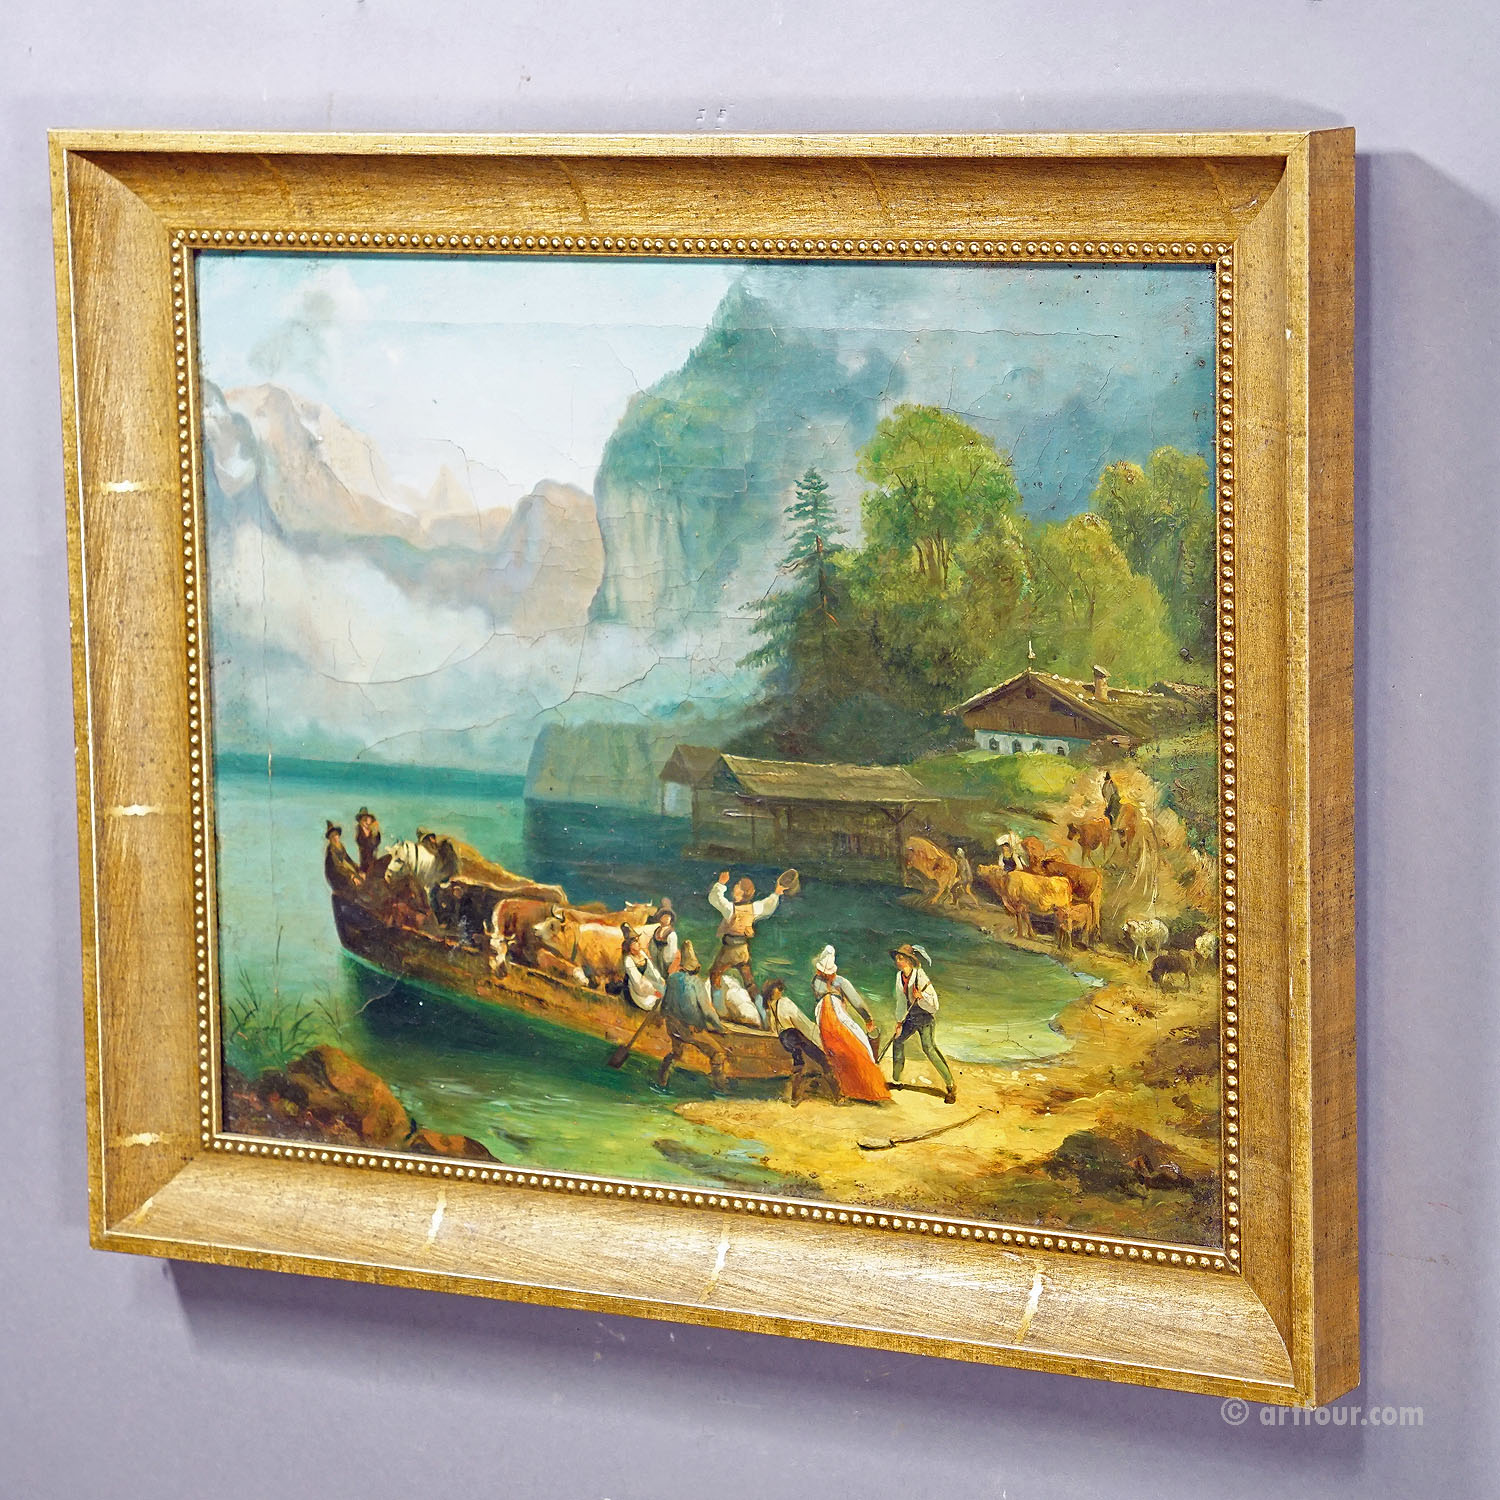 Antique Painting Cattle Carriage on an Alpine Lake, Oil on Canvas 19th century